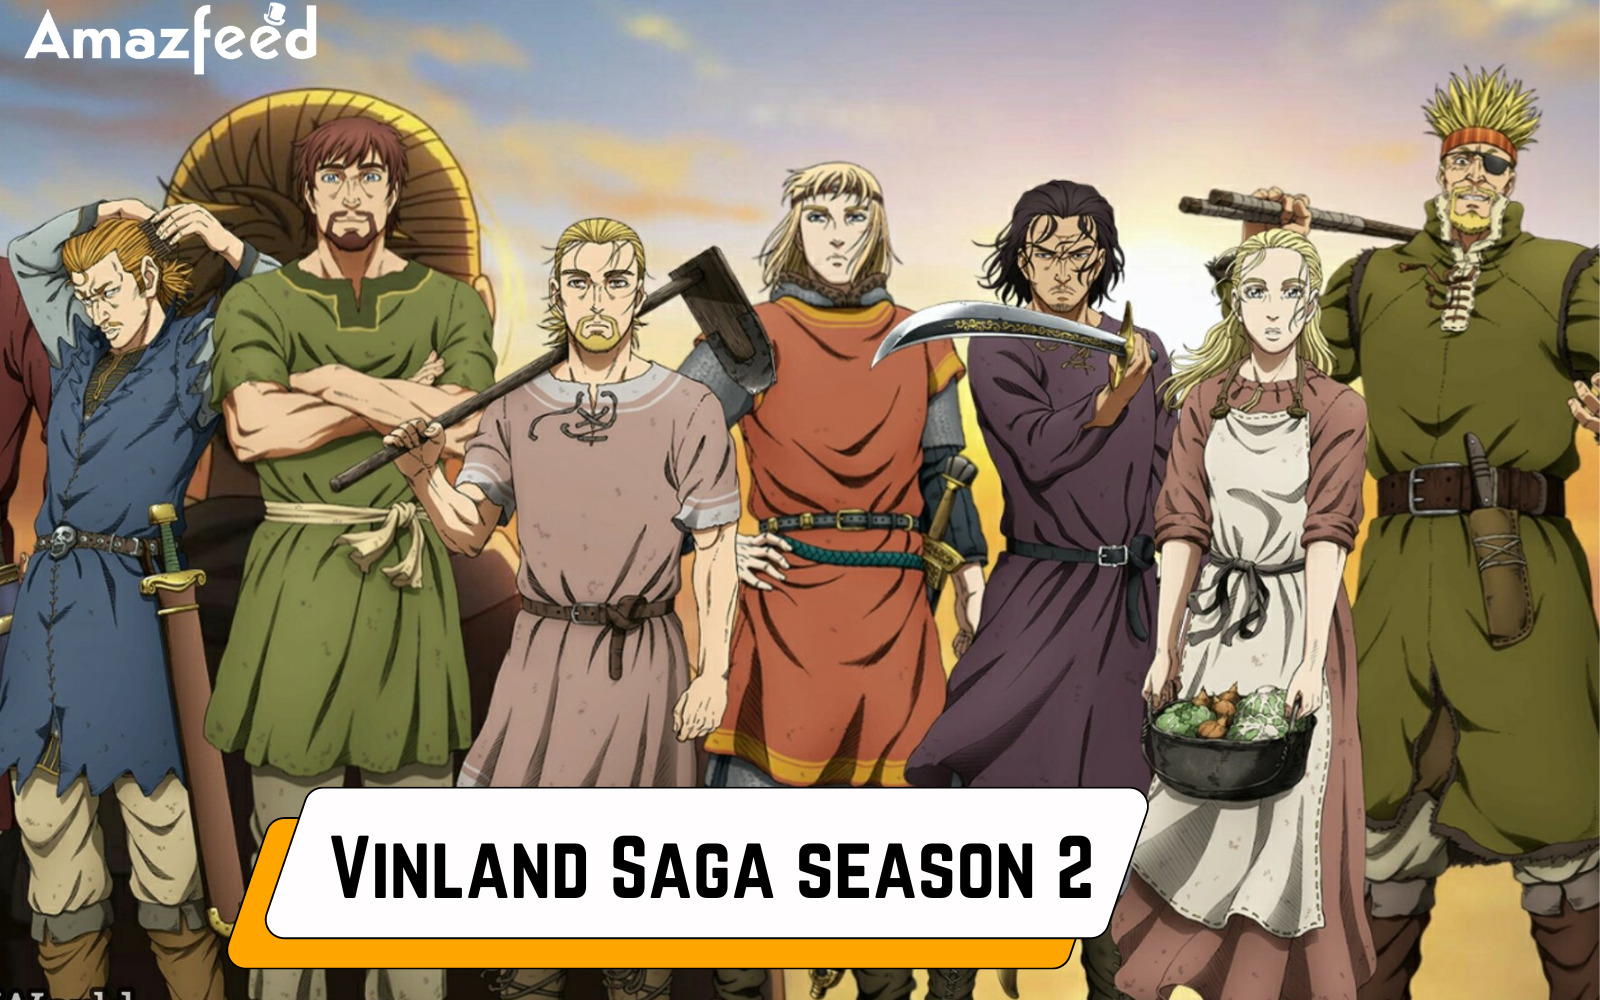 What can we expect from Vinland Saga season 2